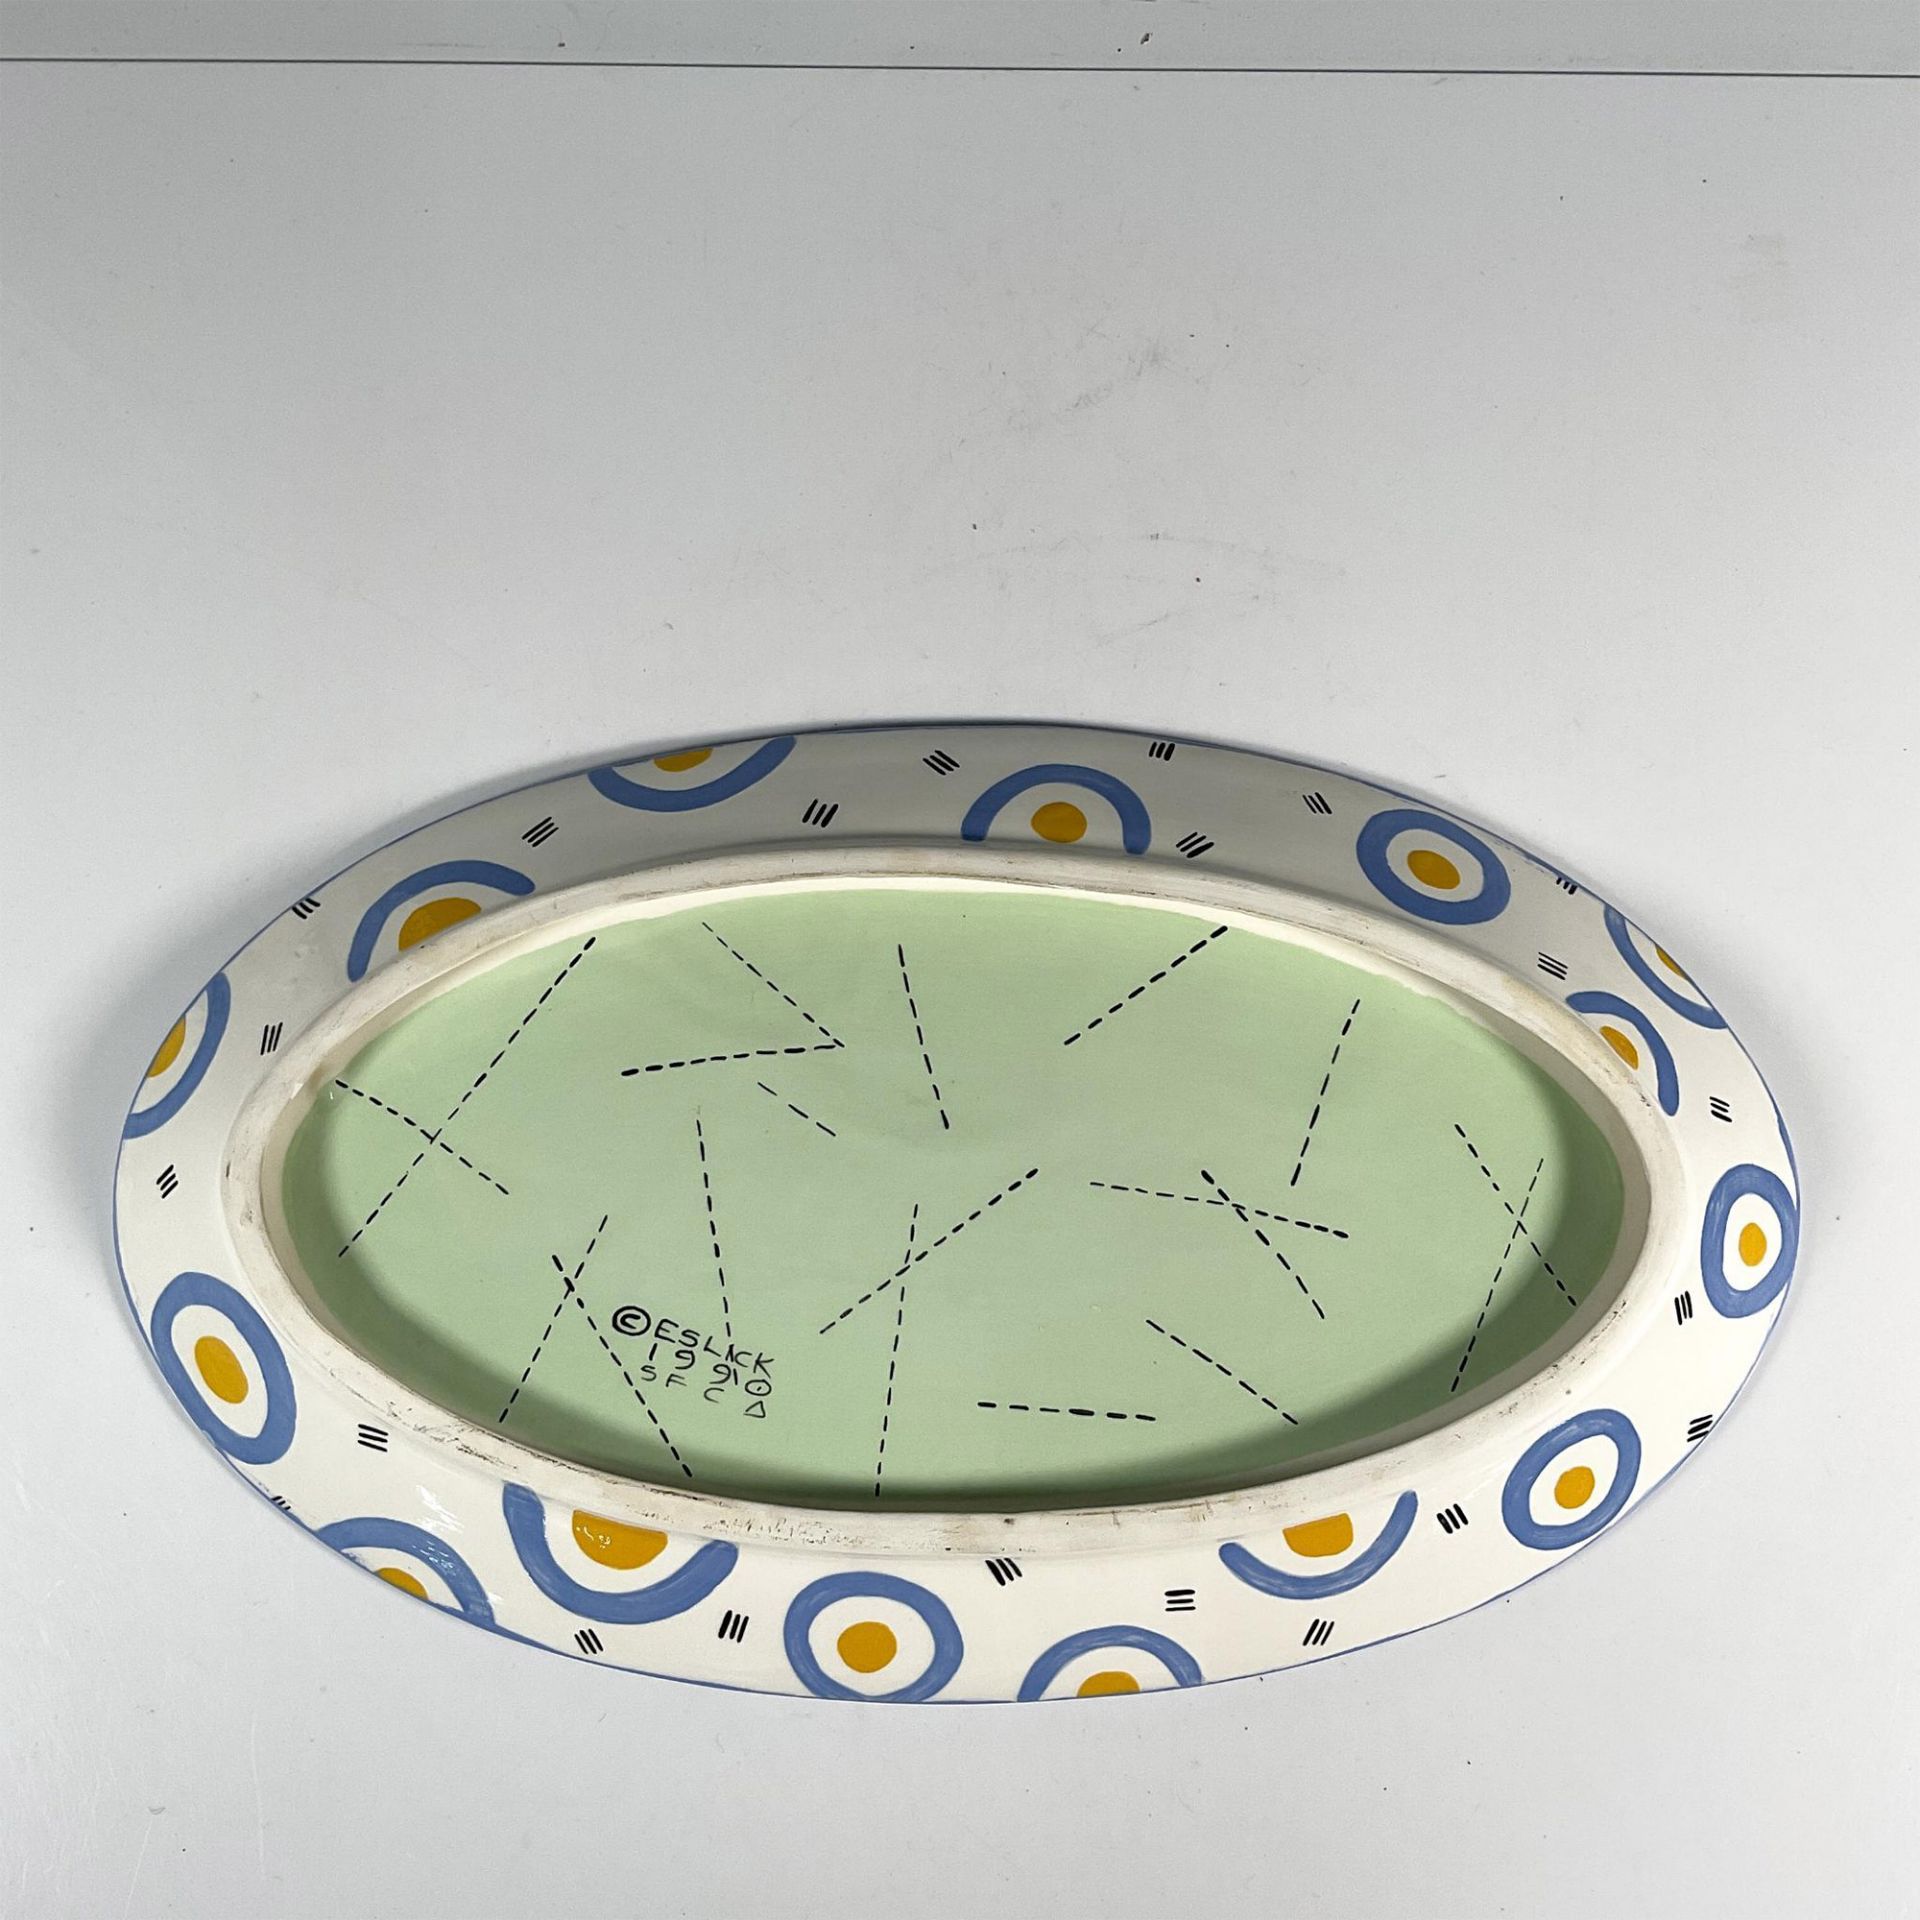 Susan Eslick Pottery Serving Tray, Stripes and Dots - Image 2 of 3